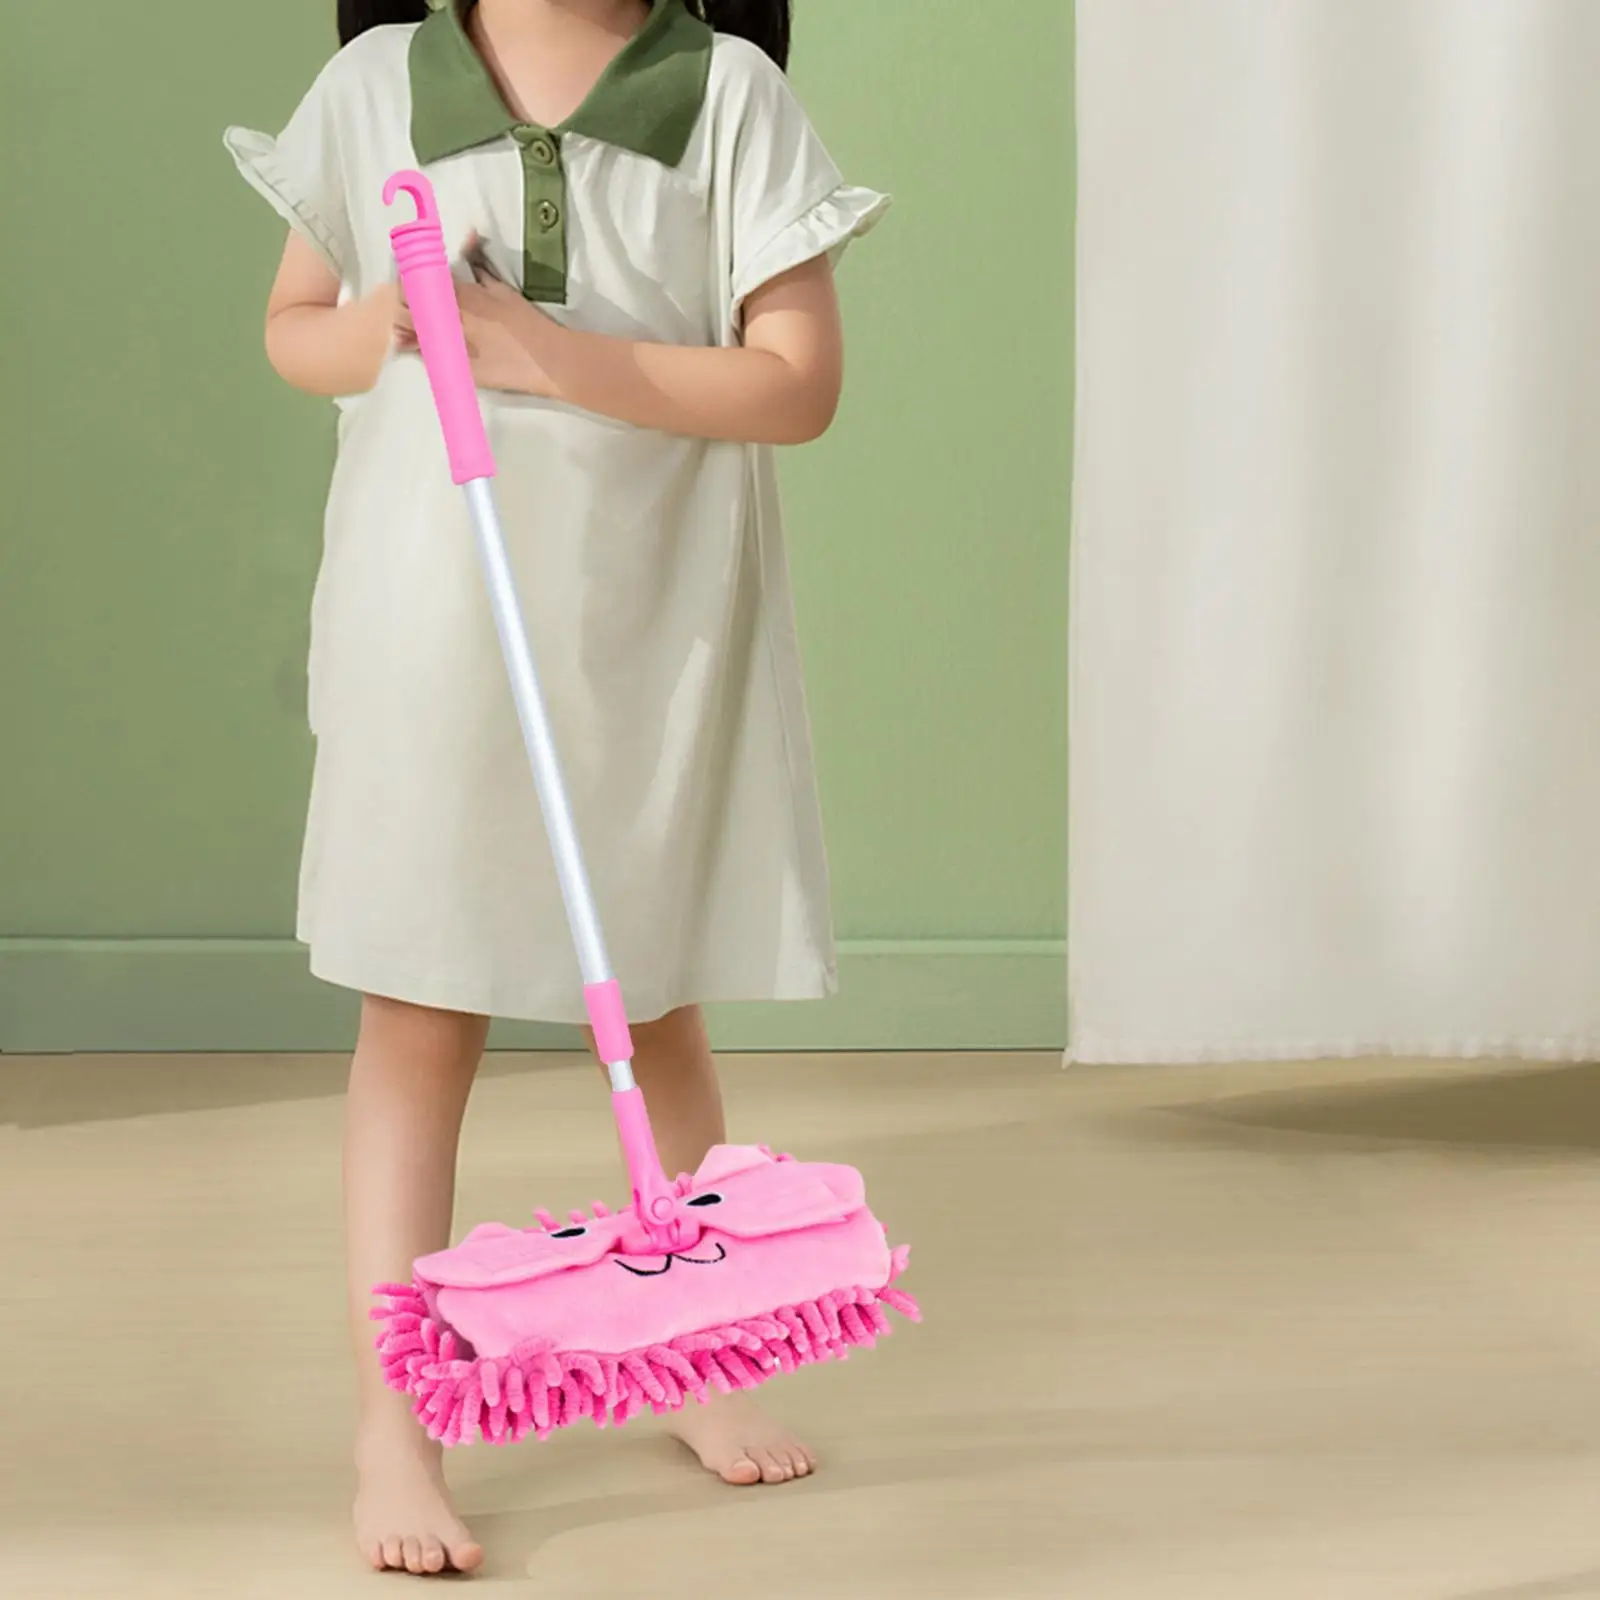 Kids Mini Mop Kids Household Cleaning Toy for Creativity Birthday Gifts